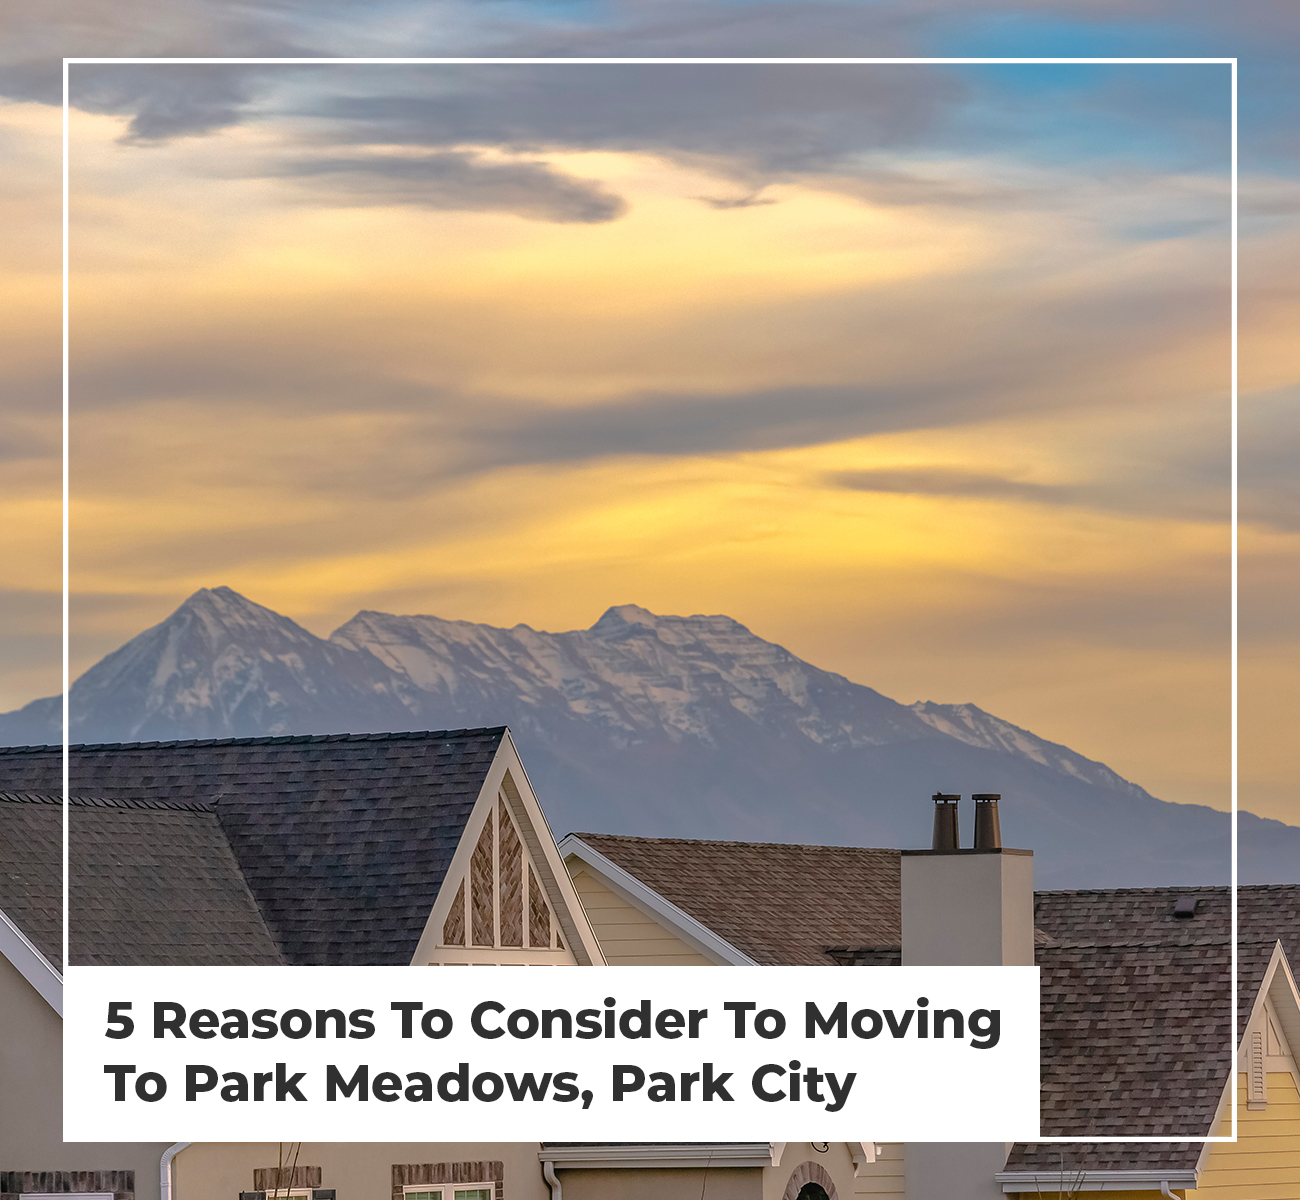 5 Reasons To Consider To Moving To Park Meadows, Park City